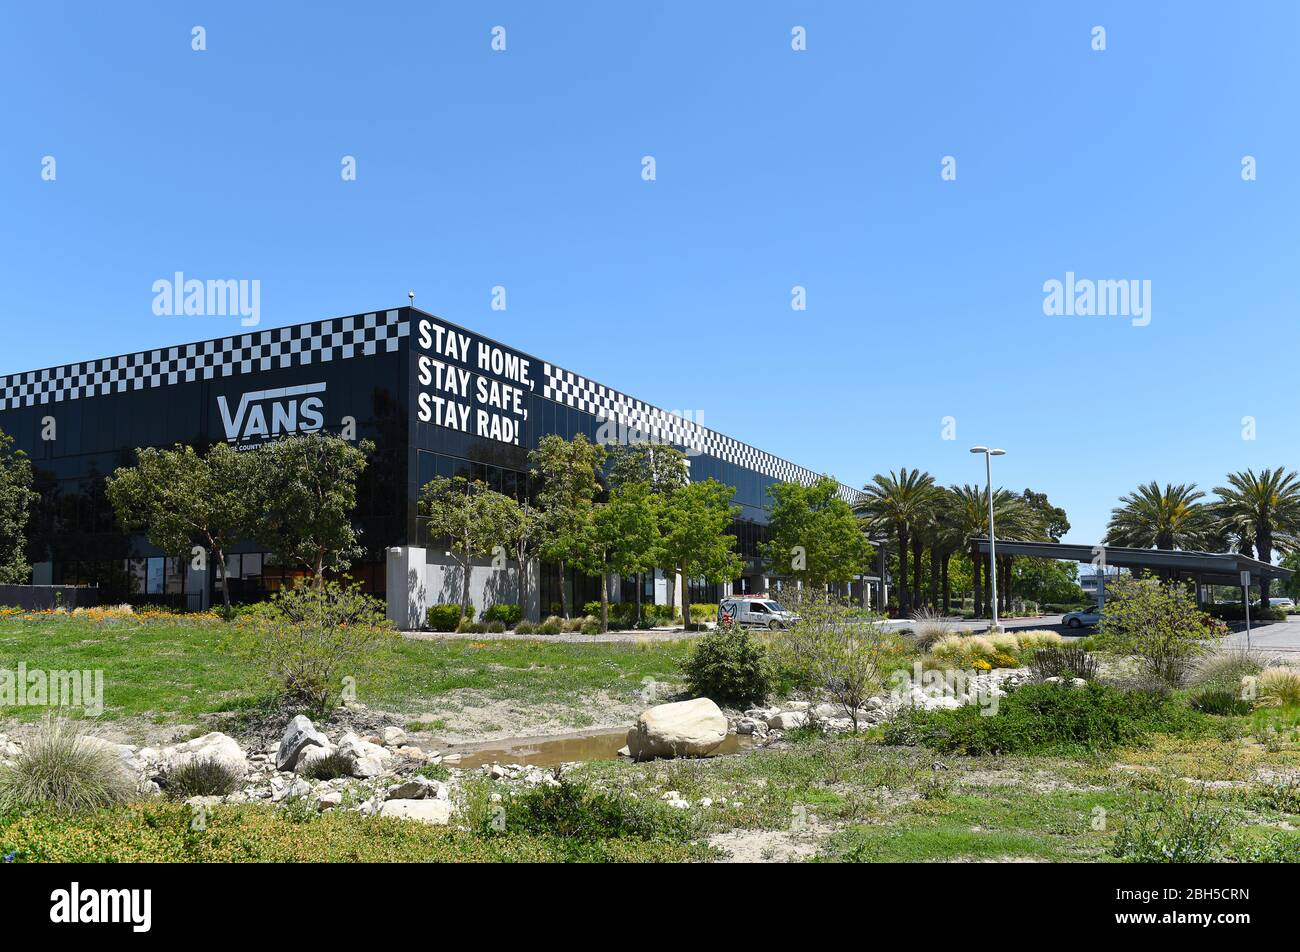 COSTA MESA, CALIFORNIA - 23 APRIL 2020: Vans “Off the Wall” Headquarters, a  shoe and apparel company, with Stay Home, Stay Safe, Stay Rad sign on the  Stock Photo - Alamy